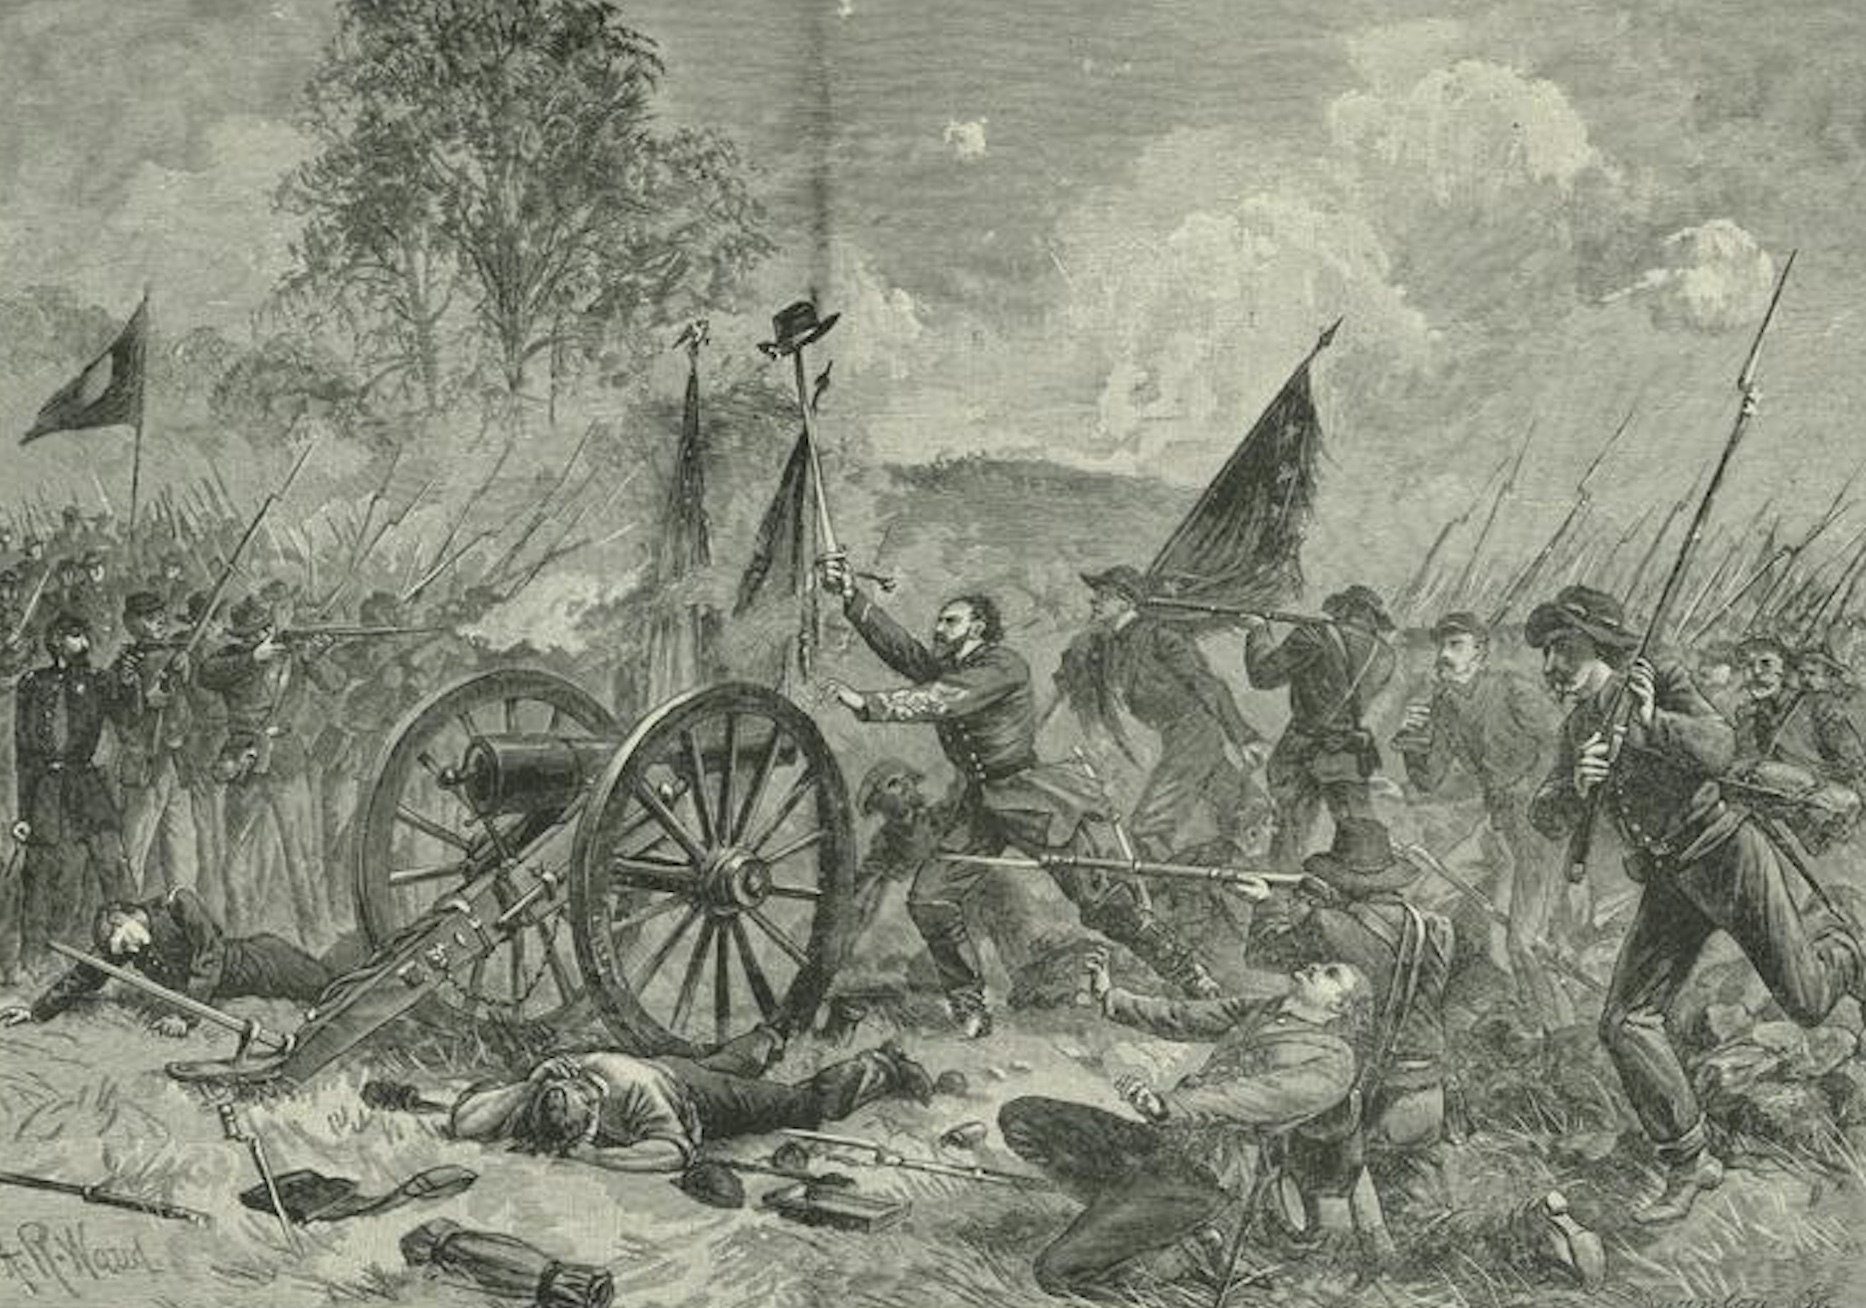 Pickett's Charge by Alfred Waud